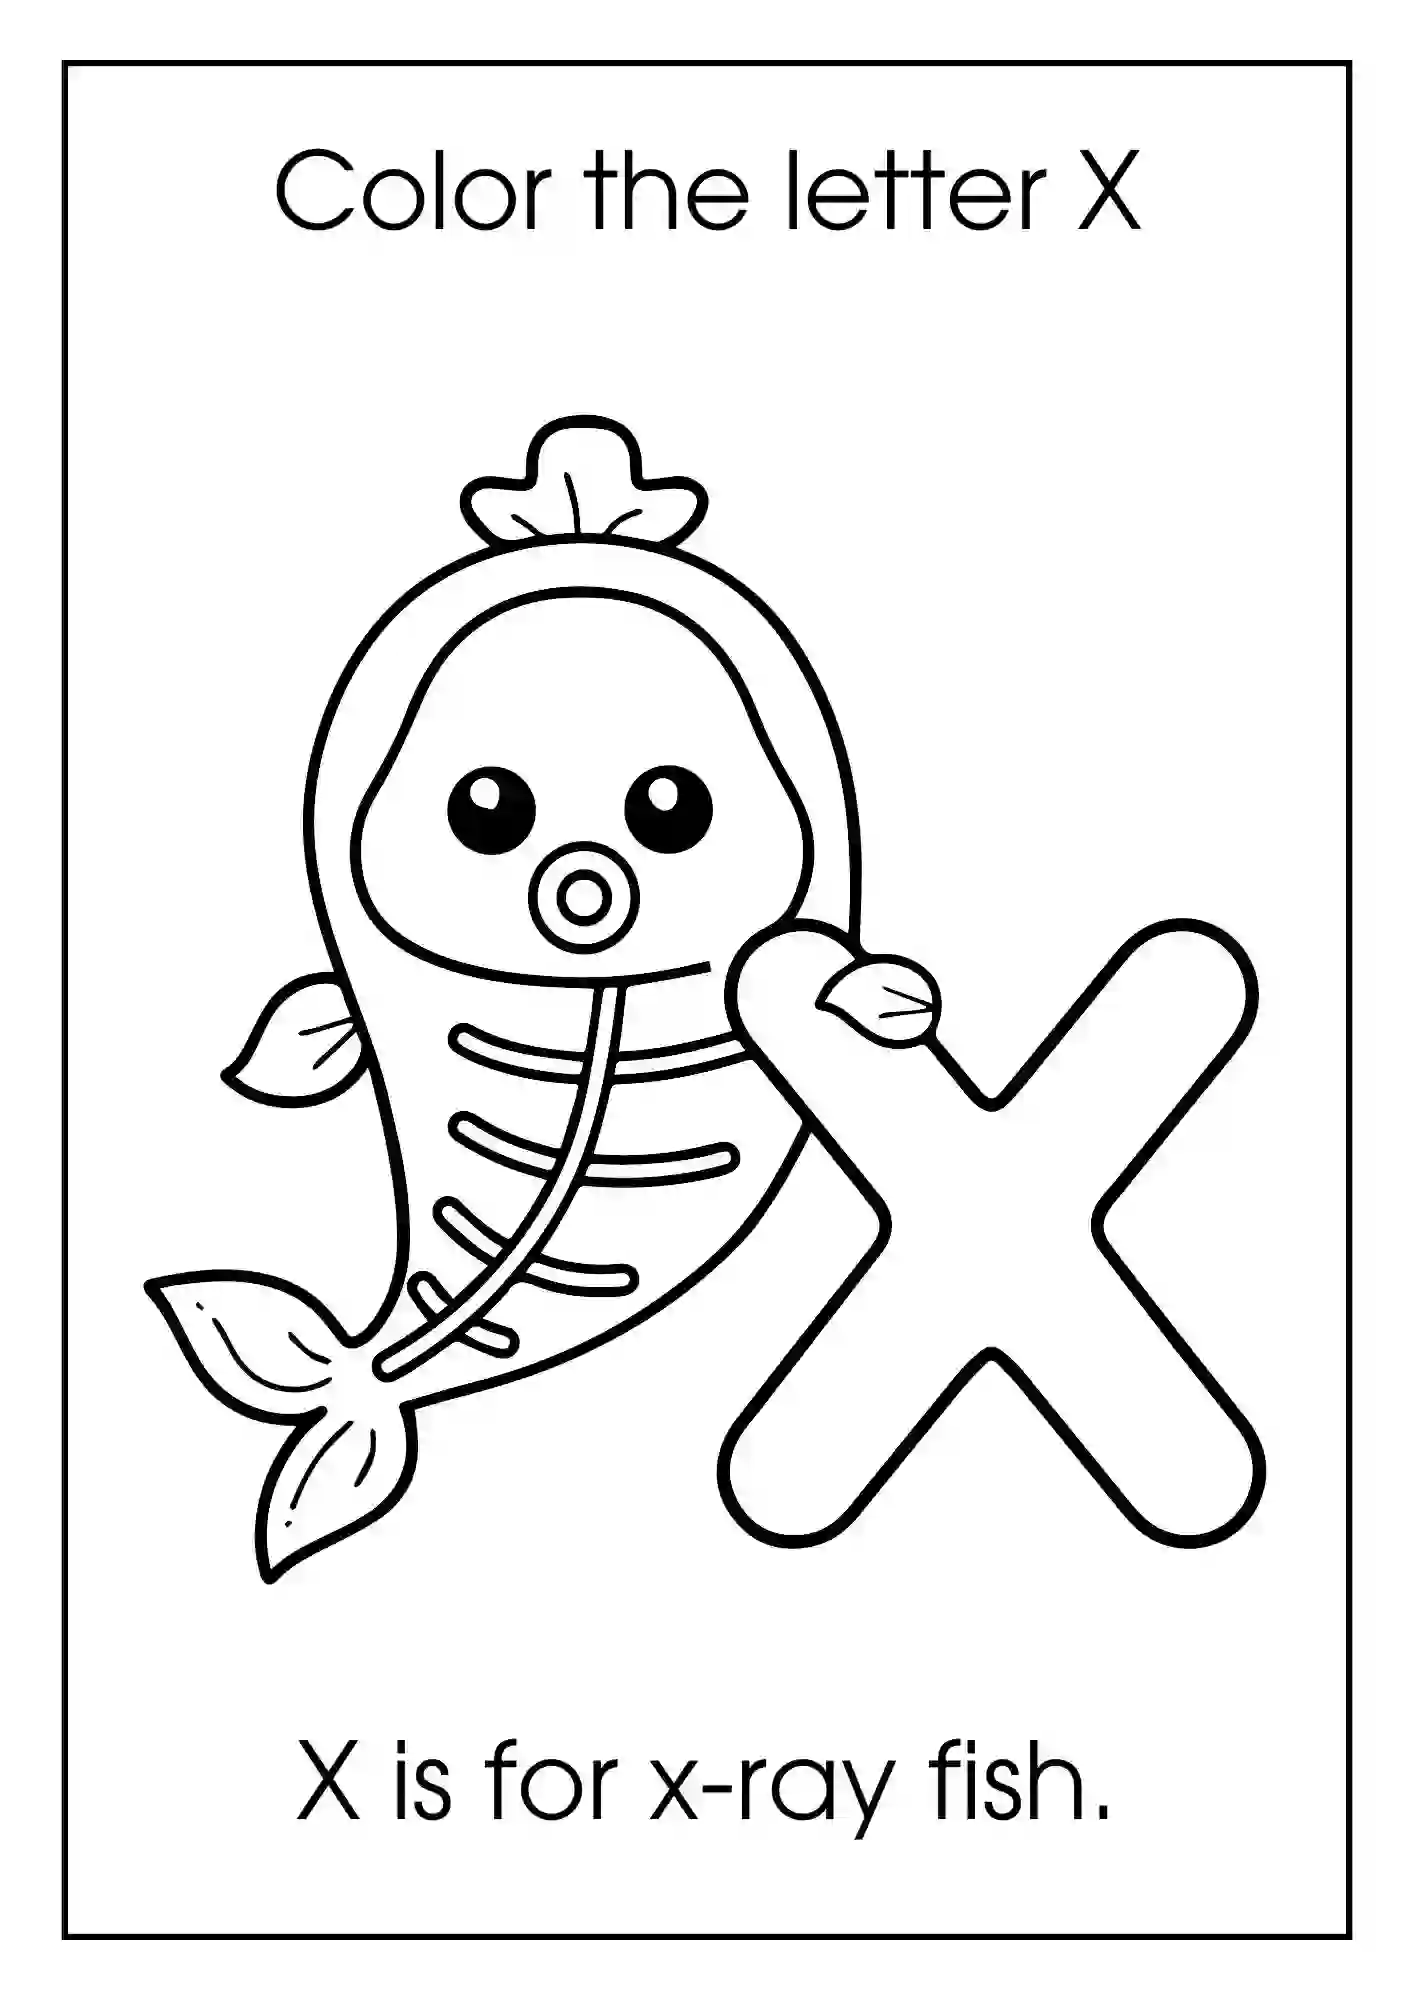 Animal Alphabet Coloring Worksheets For Kindergarten (Letter x with x-ray fish)